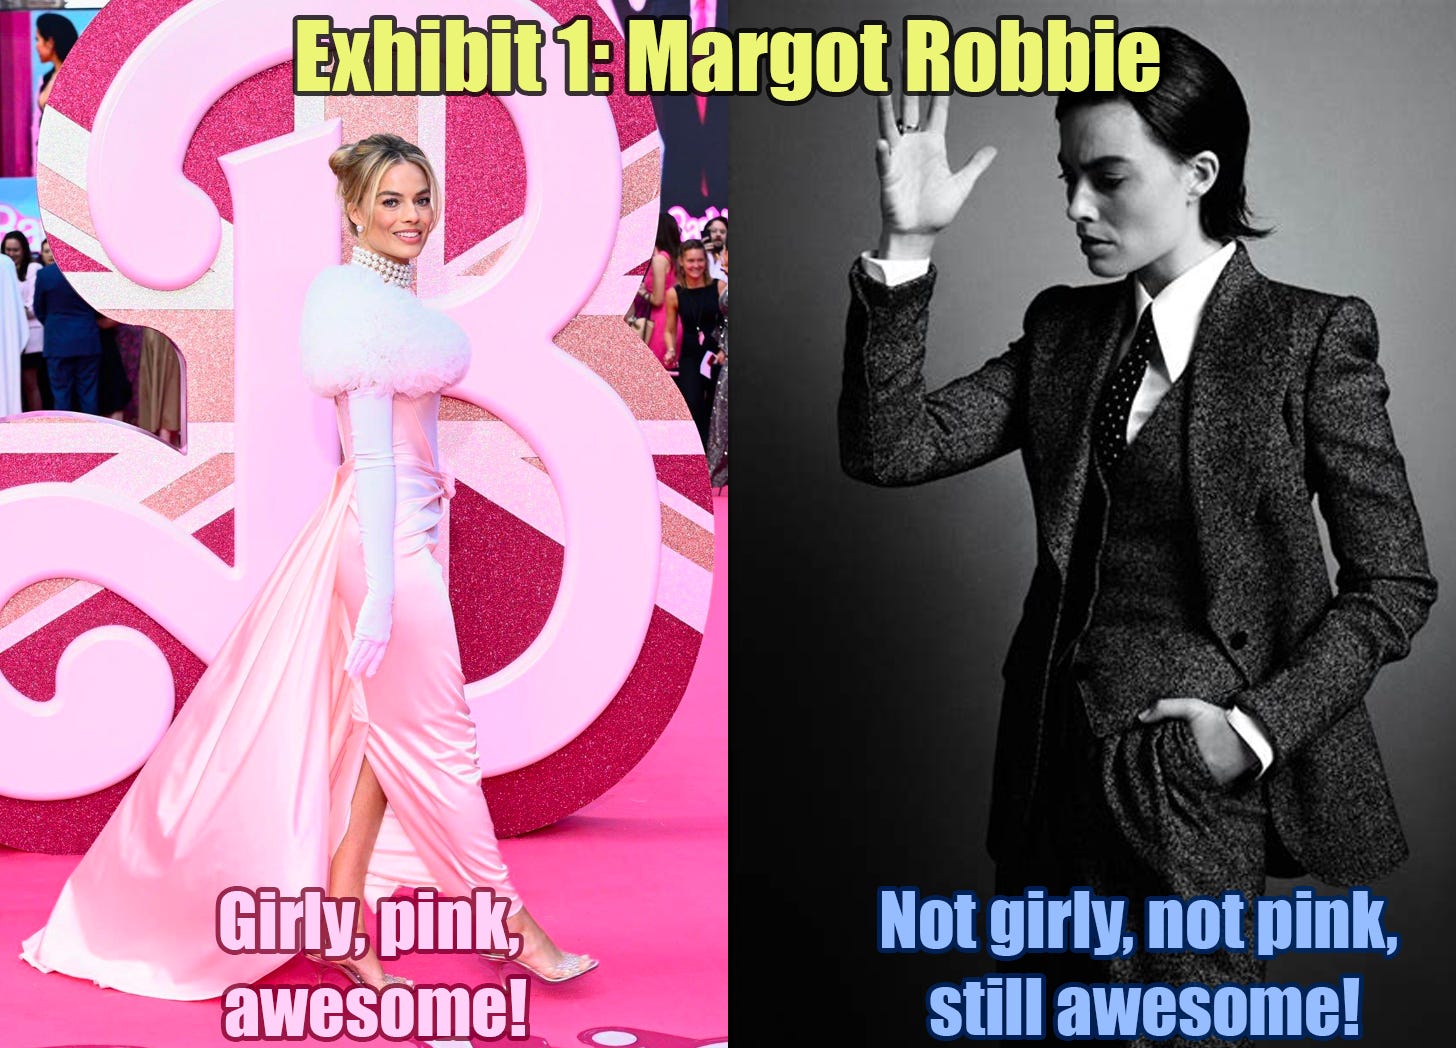 Side by side comparison of Margot Robbie pictures: one in Barbie pink, one in masculine suit. Both awesome.